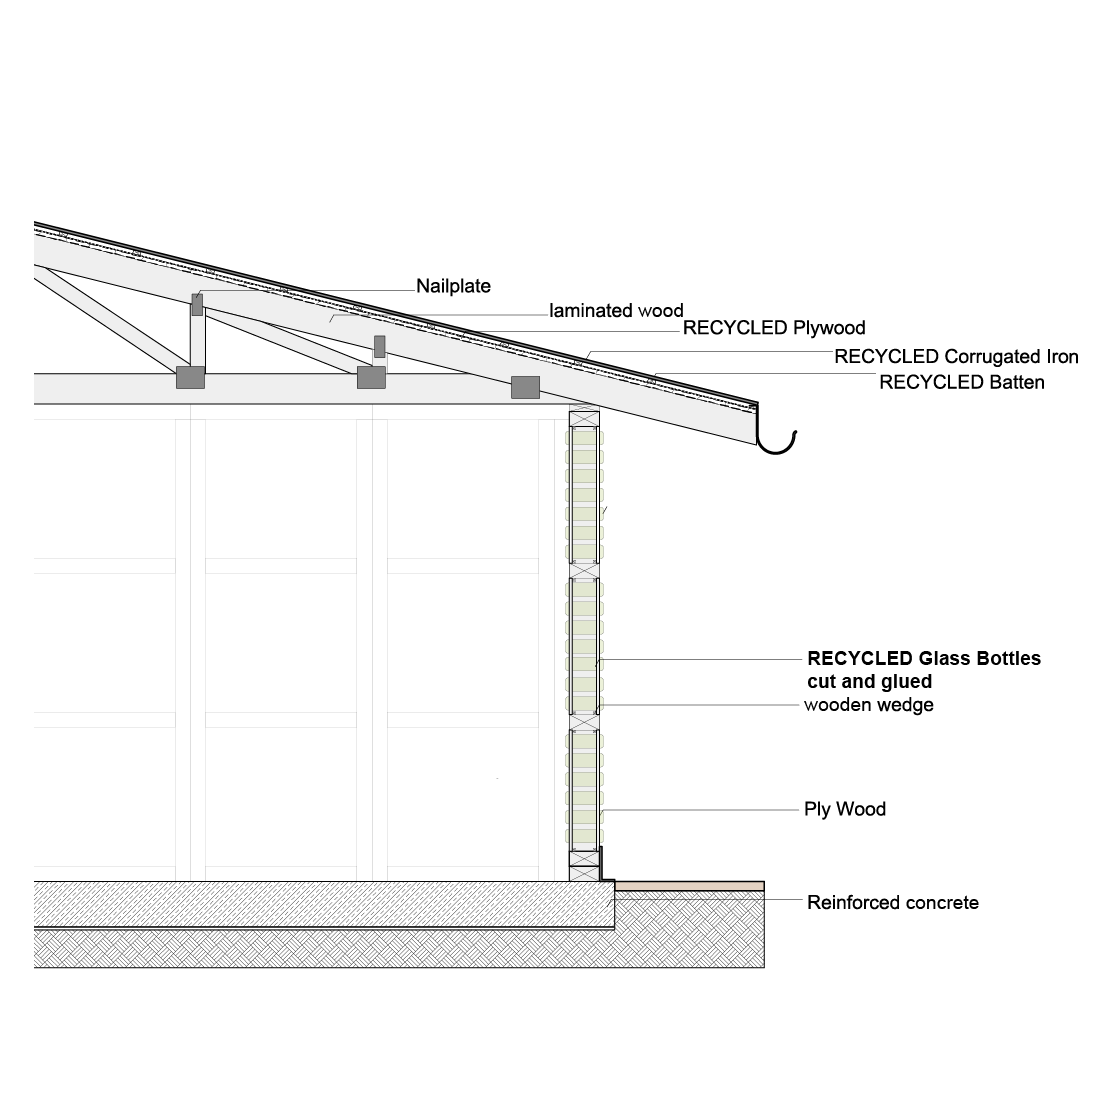 Structure of the recycling hut for glass